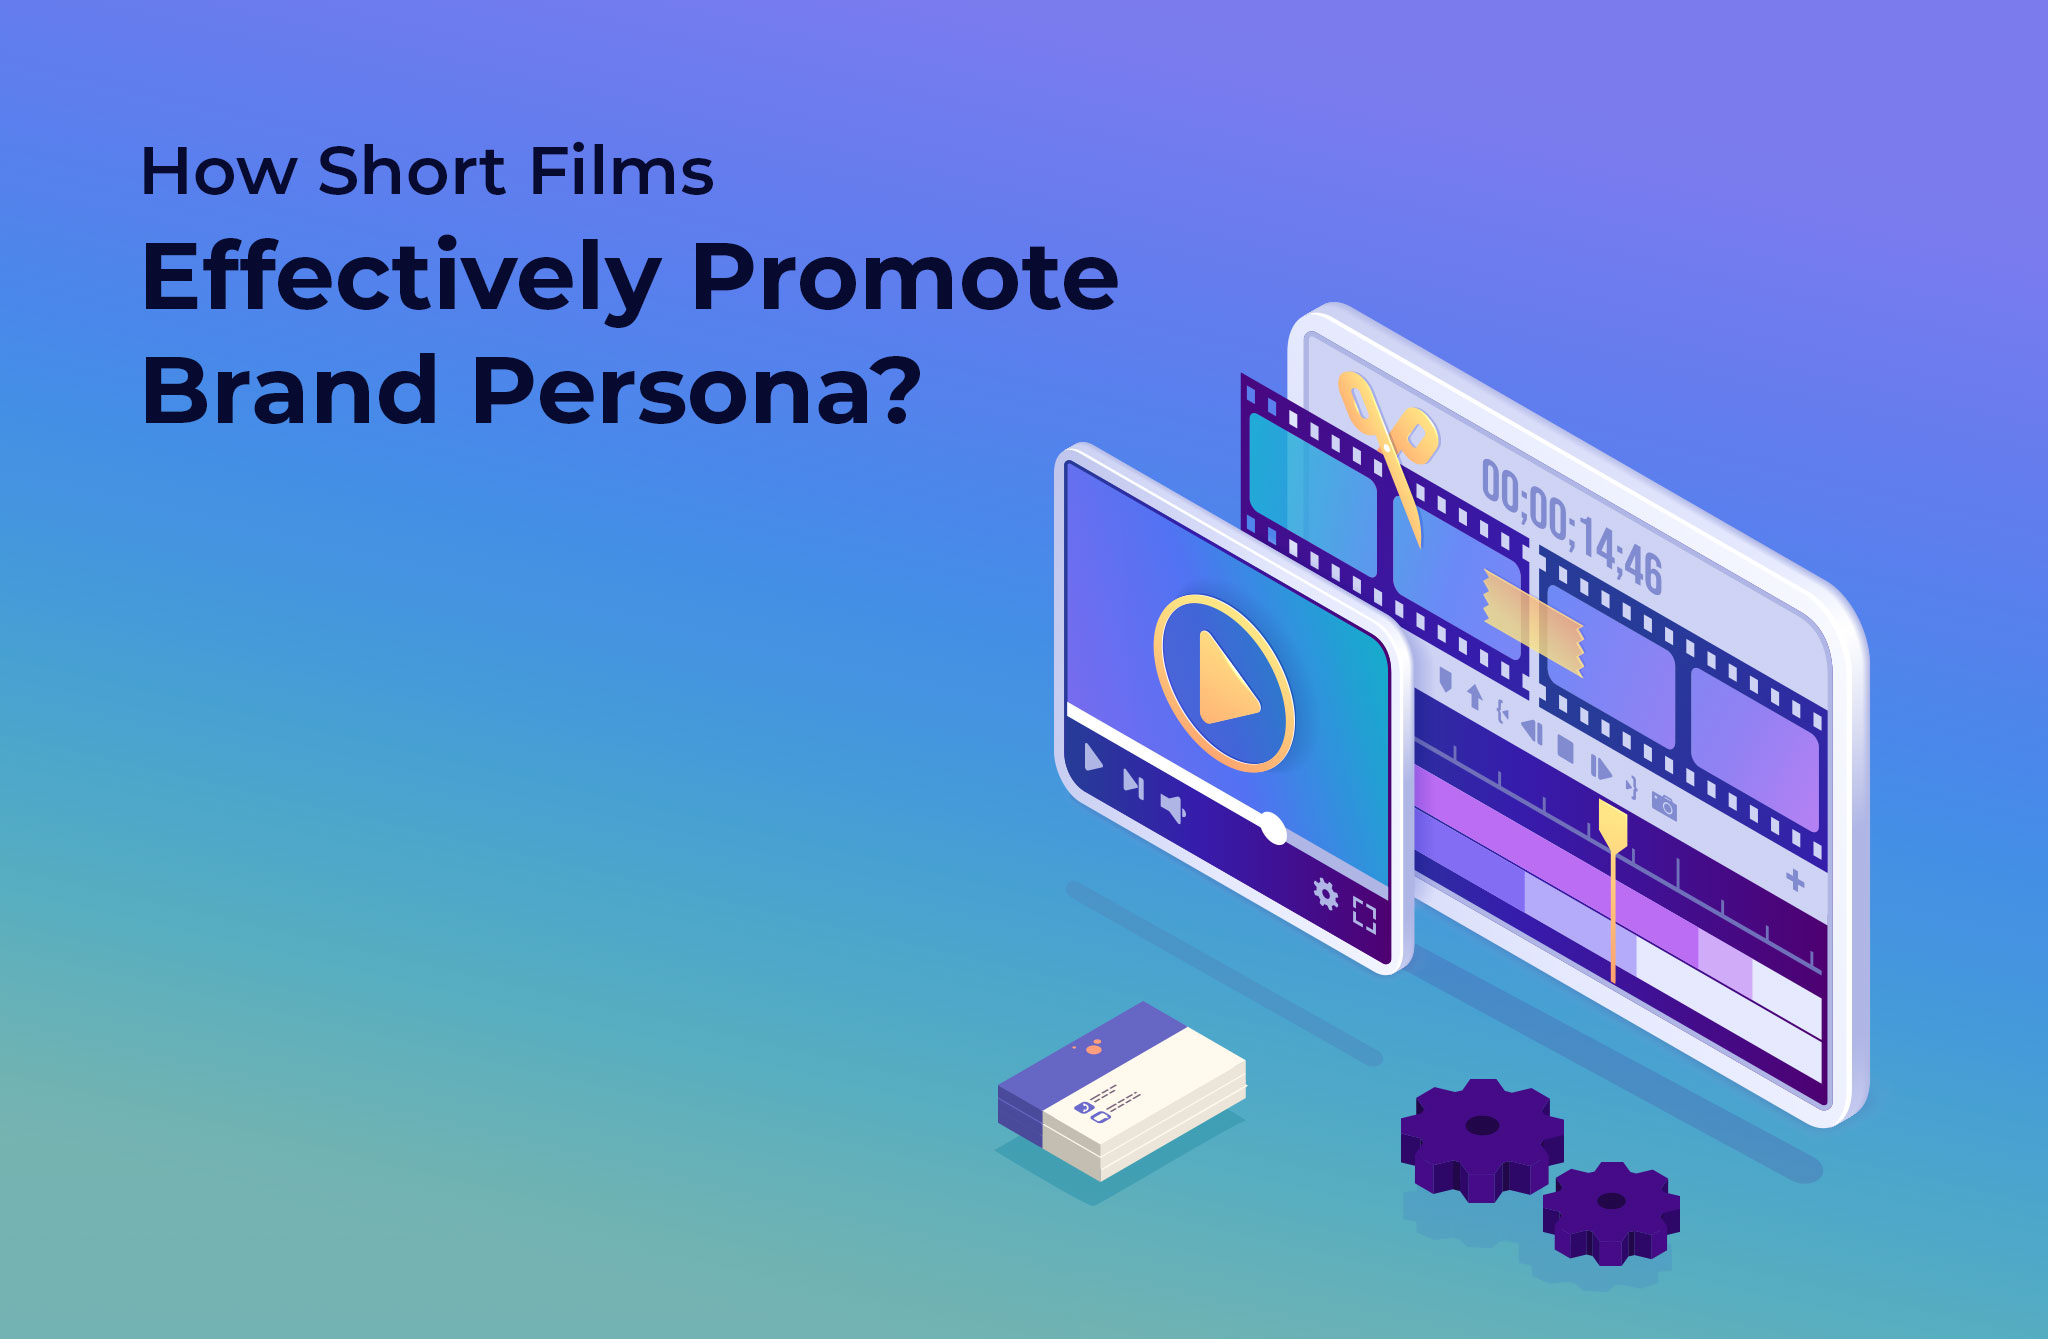 How Short Films Effectively Promote Brand Persona?